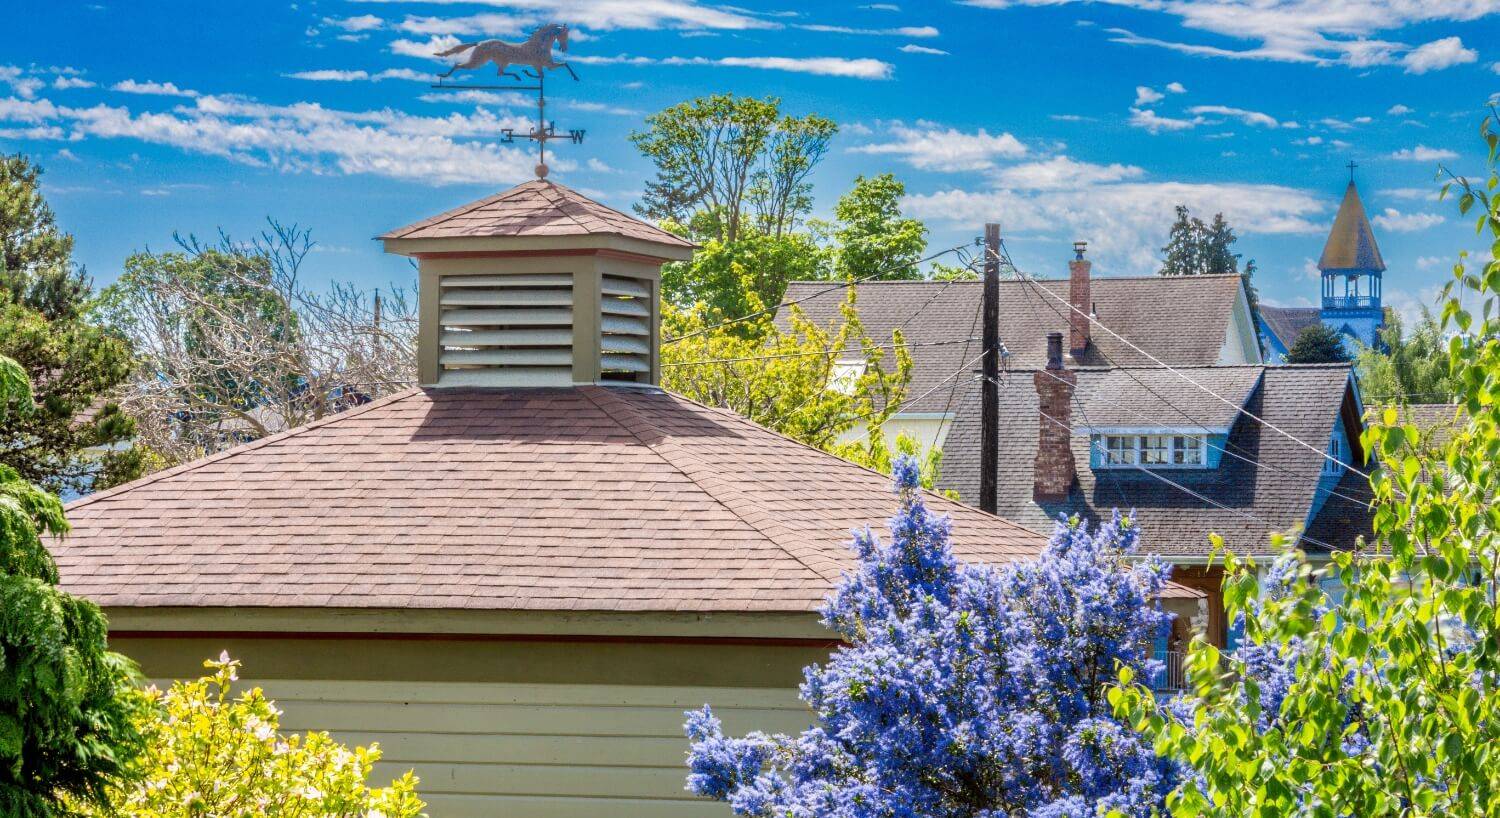 The rooftops of some houses with a horse weather vane on one house, and a steeple in the background, along with trees and a bush with purple flowers.